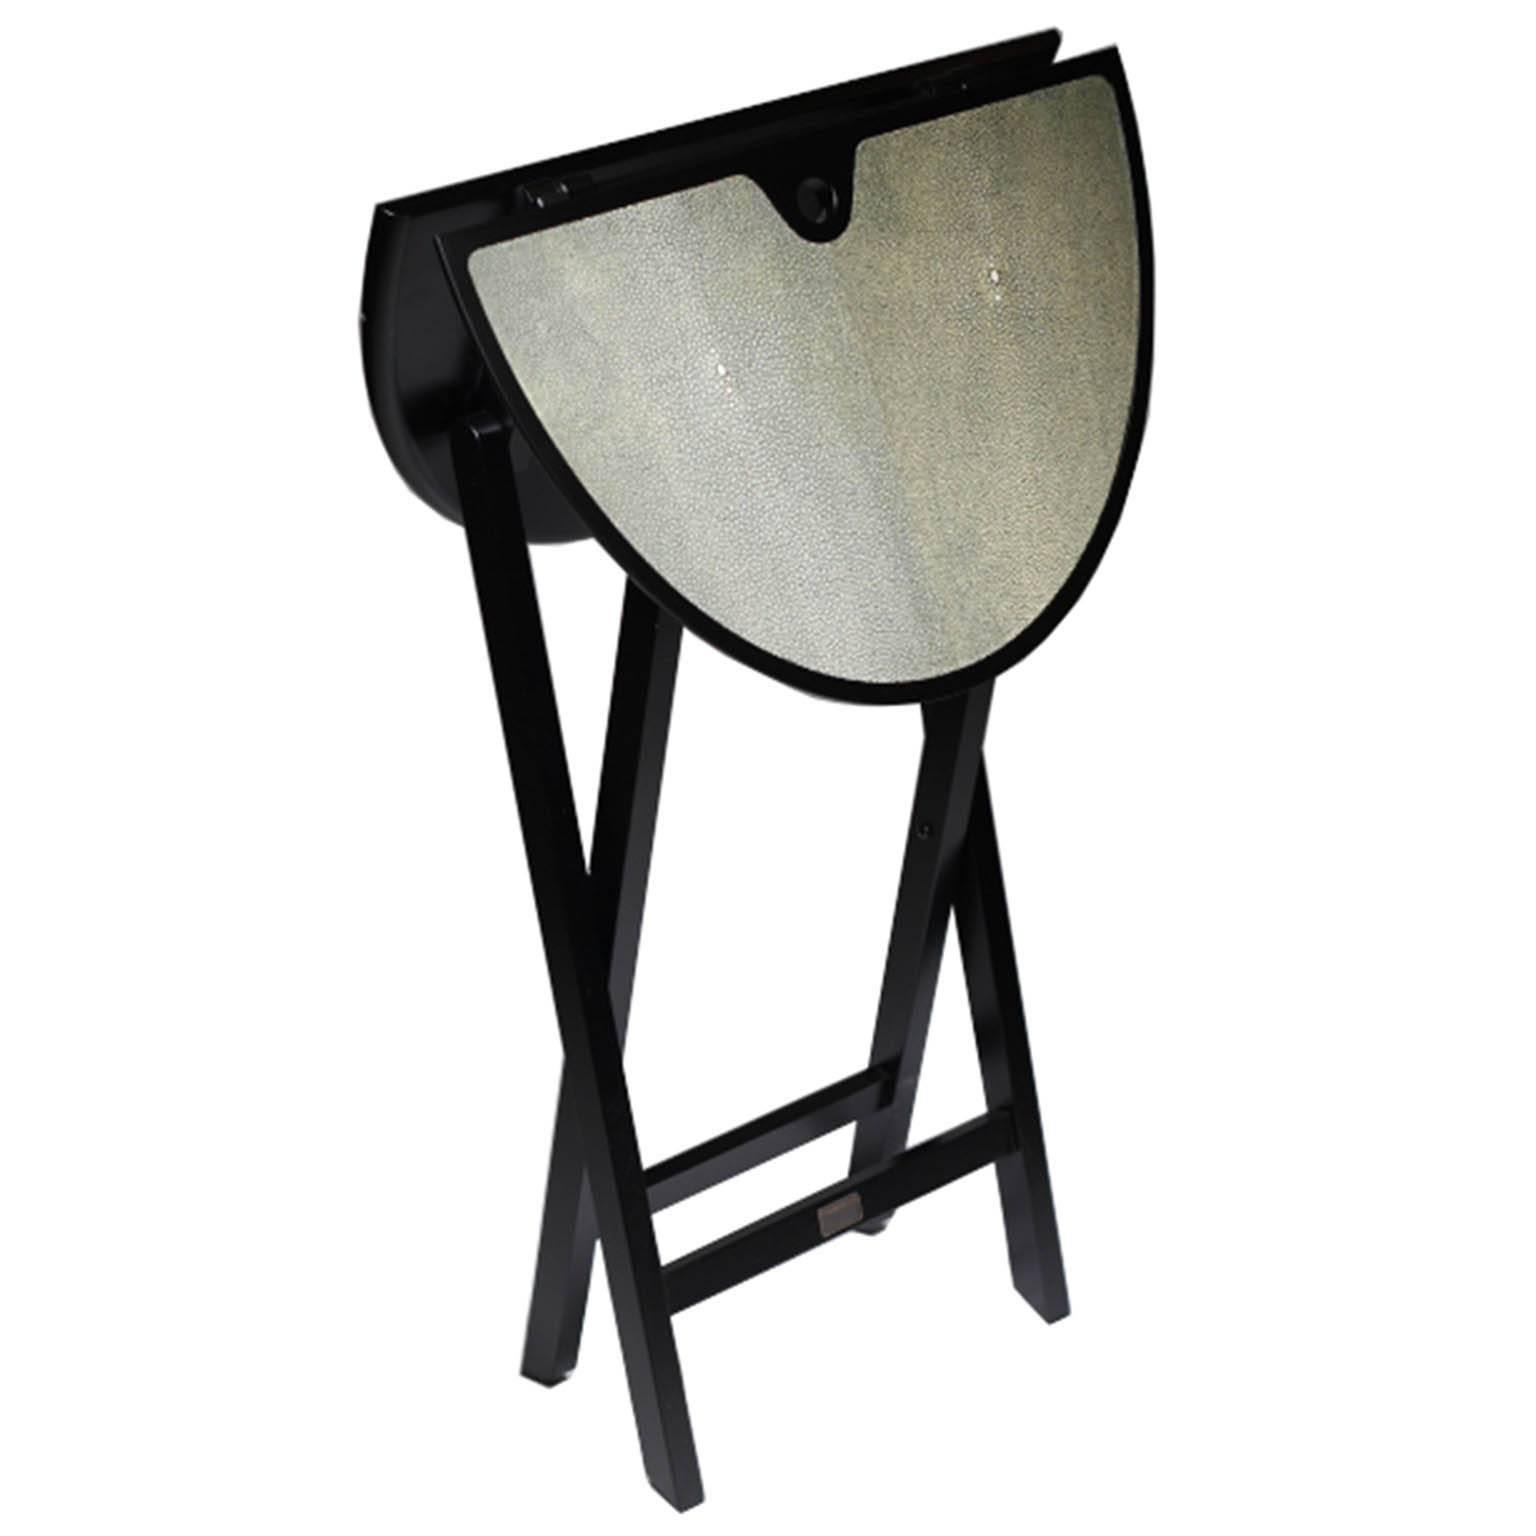 Folding small table. Structure in matte black, top covered in Shagreen (stingray skin).